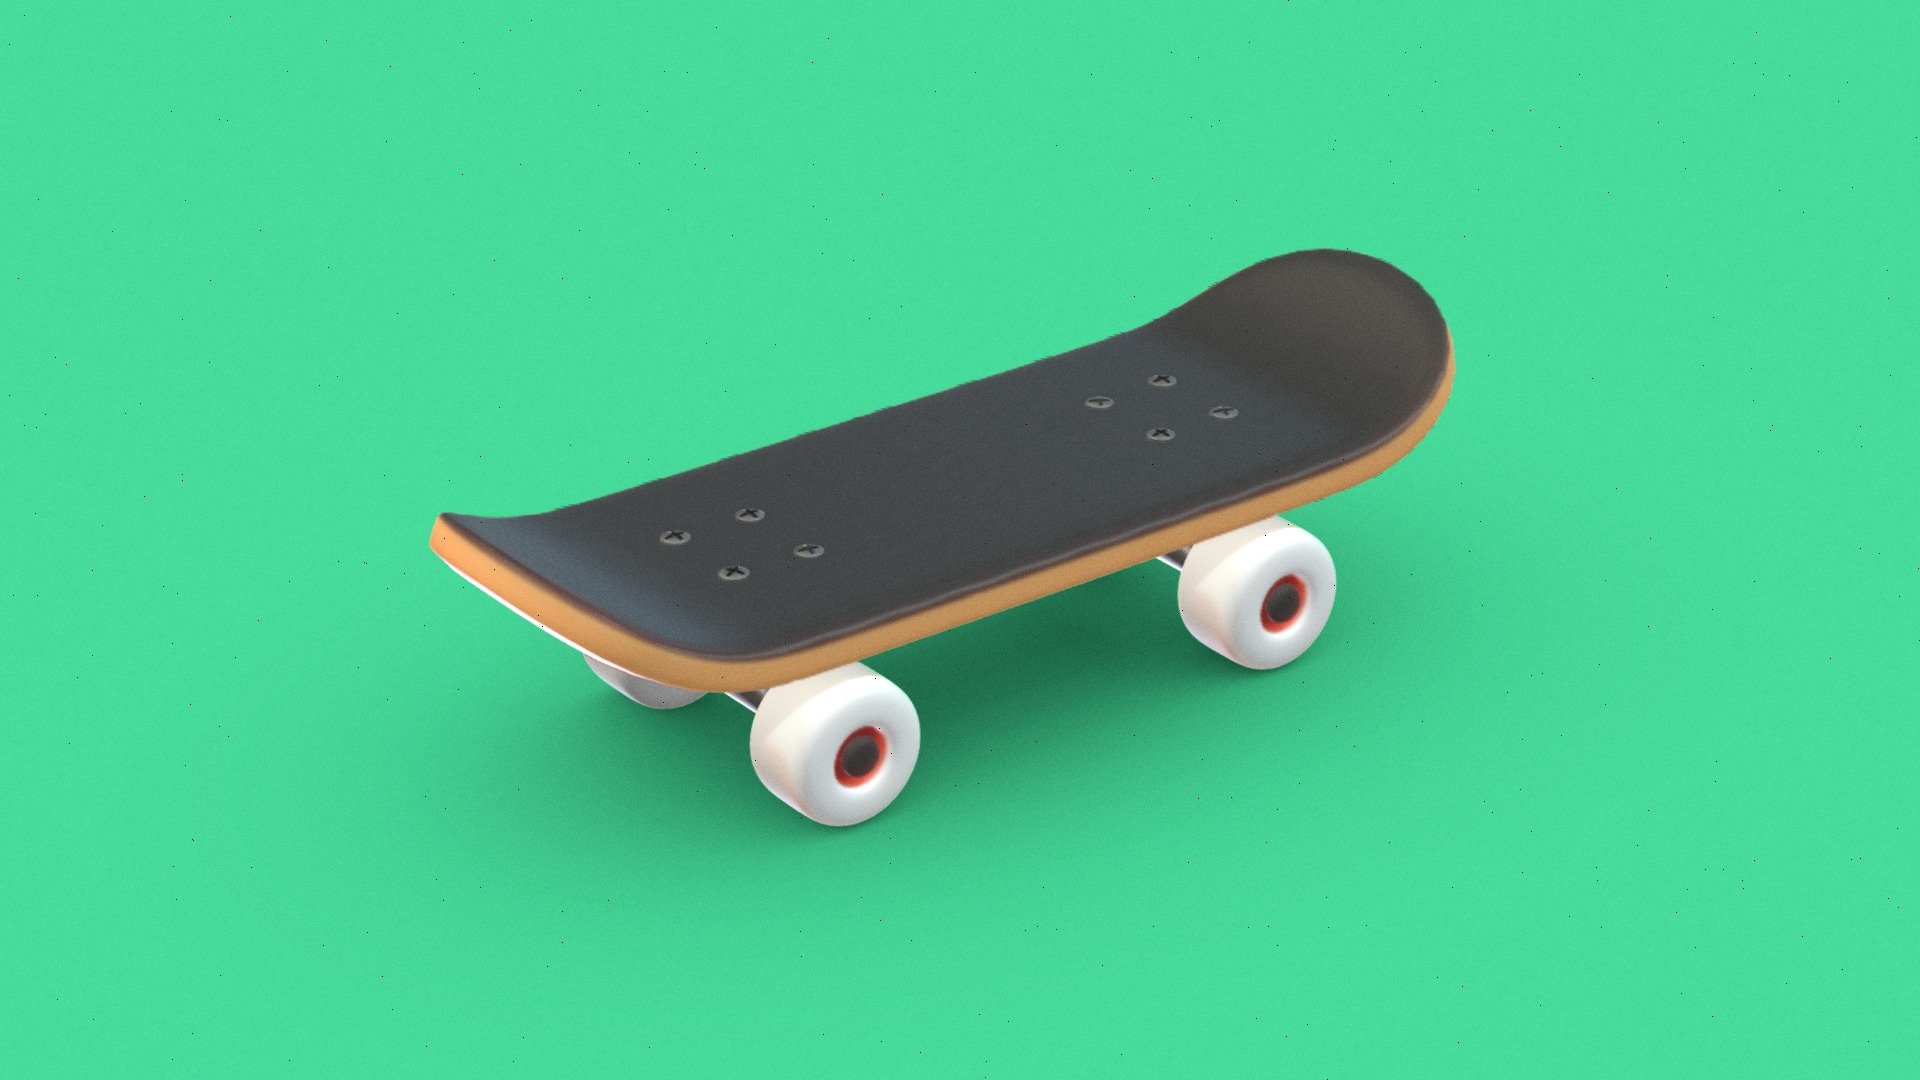 A skateboard is a flat board with a curved shape, grip tape on the top, and four main components - deck, trucks, wheels, and bearings - designed for use in skateboarding 3d model